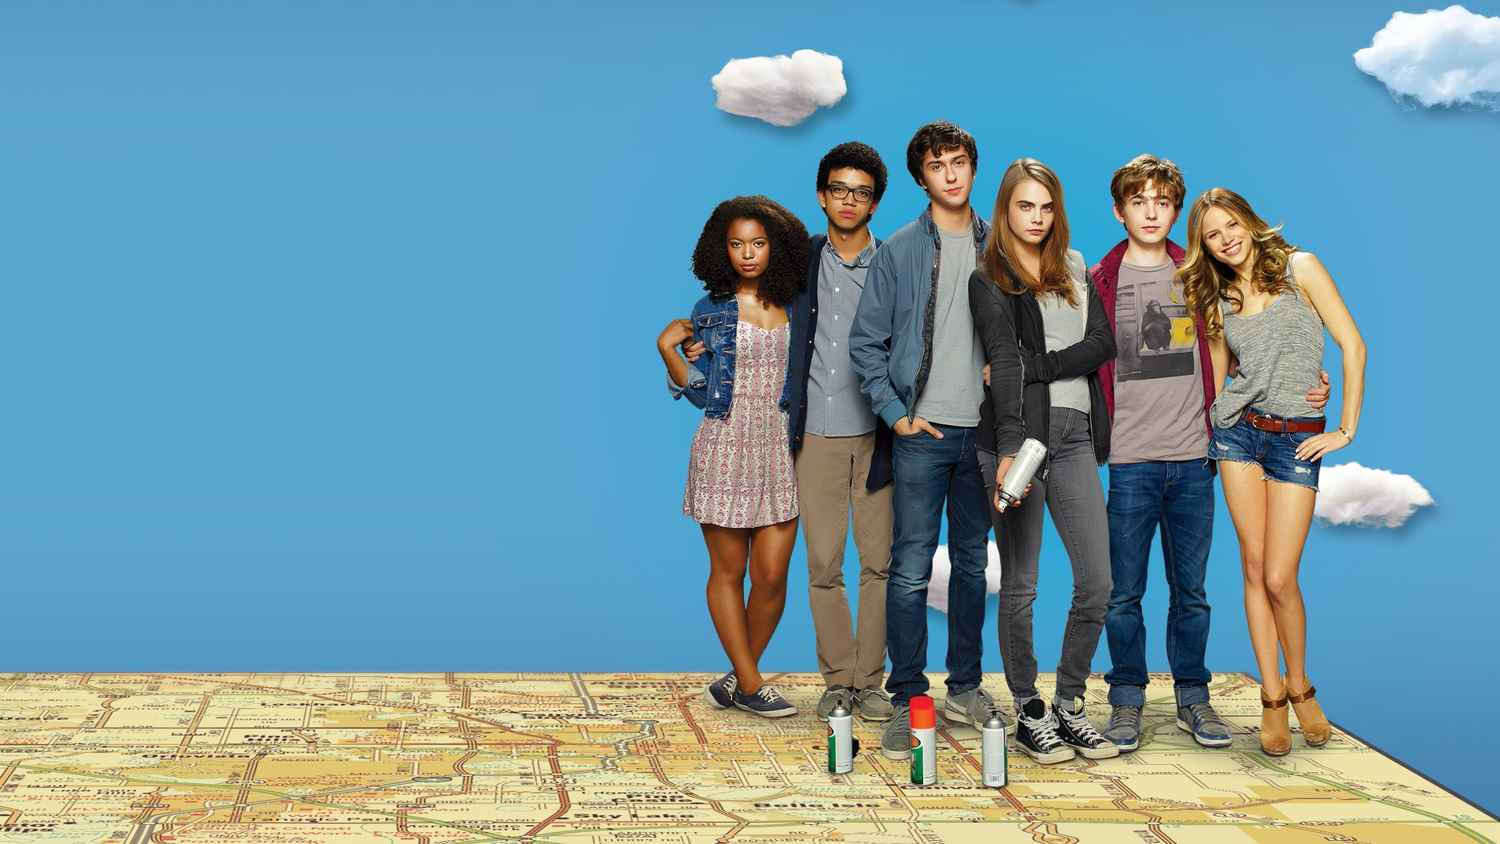 paper towns full movie